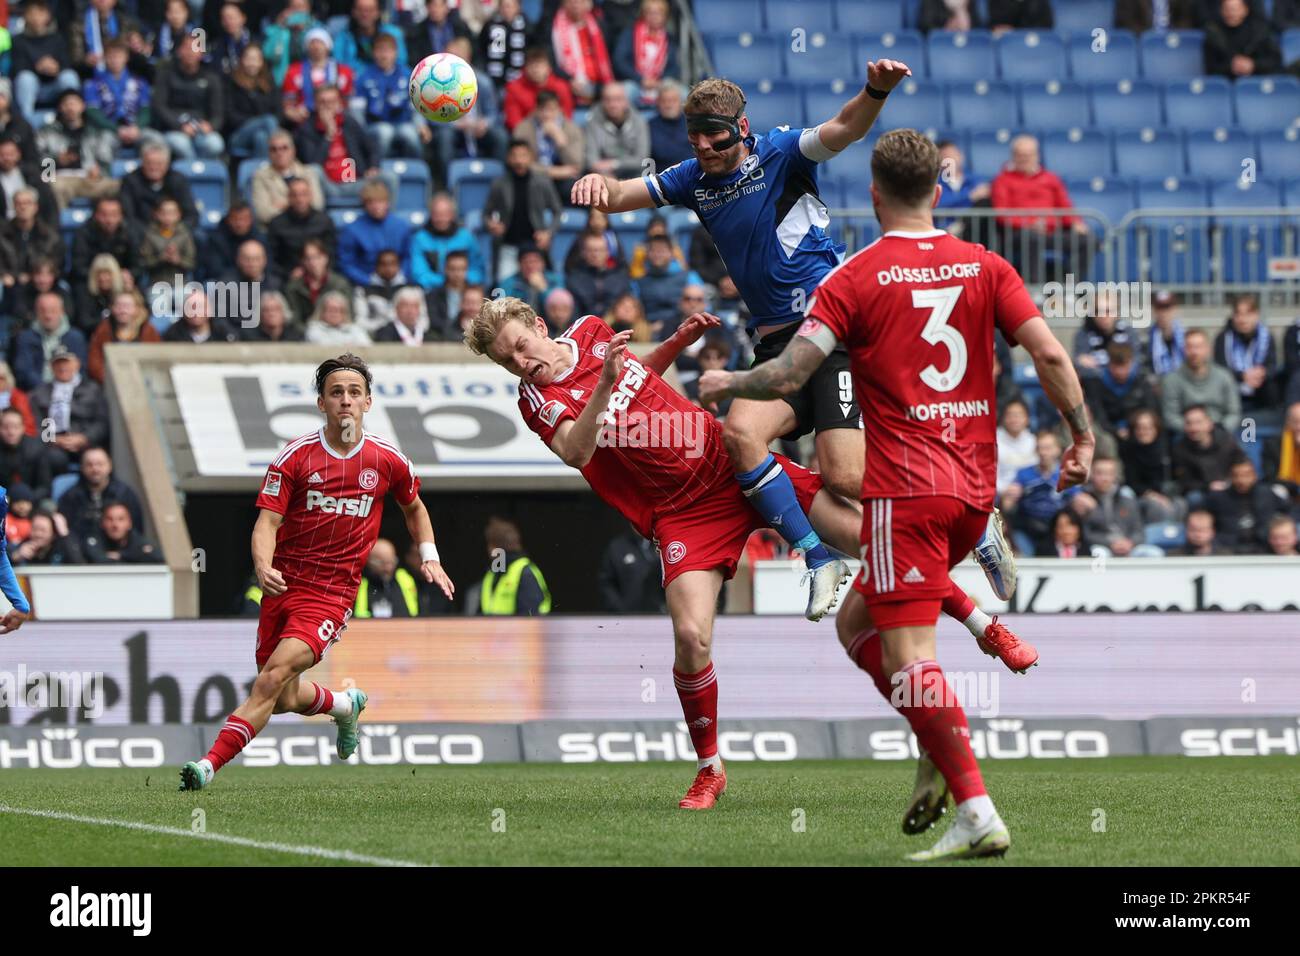 Bielefeld, Germany. 09th Apr, 2023. Soccer: 2nd Bundesliga, Arminia Bielefeld - Fortuna Düsseldorf, Matchday 27 at the Schüco Arena. Bielefeld's Fabian Klos (2nd from right) battles for the ball with Düsseldorf's Christoph Klarer (2nd from left). Credit: Friso Gentsch/dpa - IMPORTANT NOTE: In accordance with the requirements of the DFL Deutsche Fußball Liga and the DFB Deutscher Fußball-Bund, it is prohibited to use or have used photographs taken in the stadium and/or of the match in the form of sequence pictures and/or video-like photo series./dpa/Alamy Live News Stock Photo